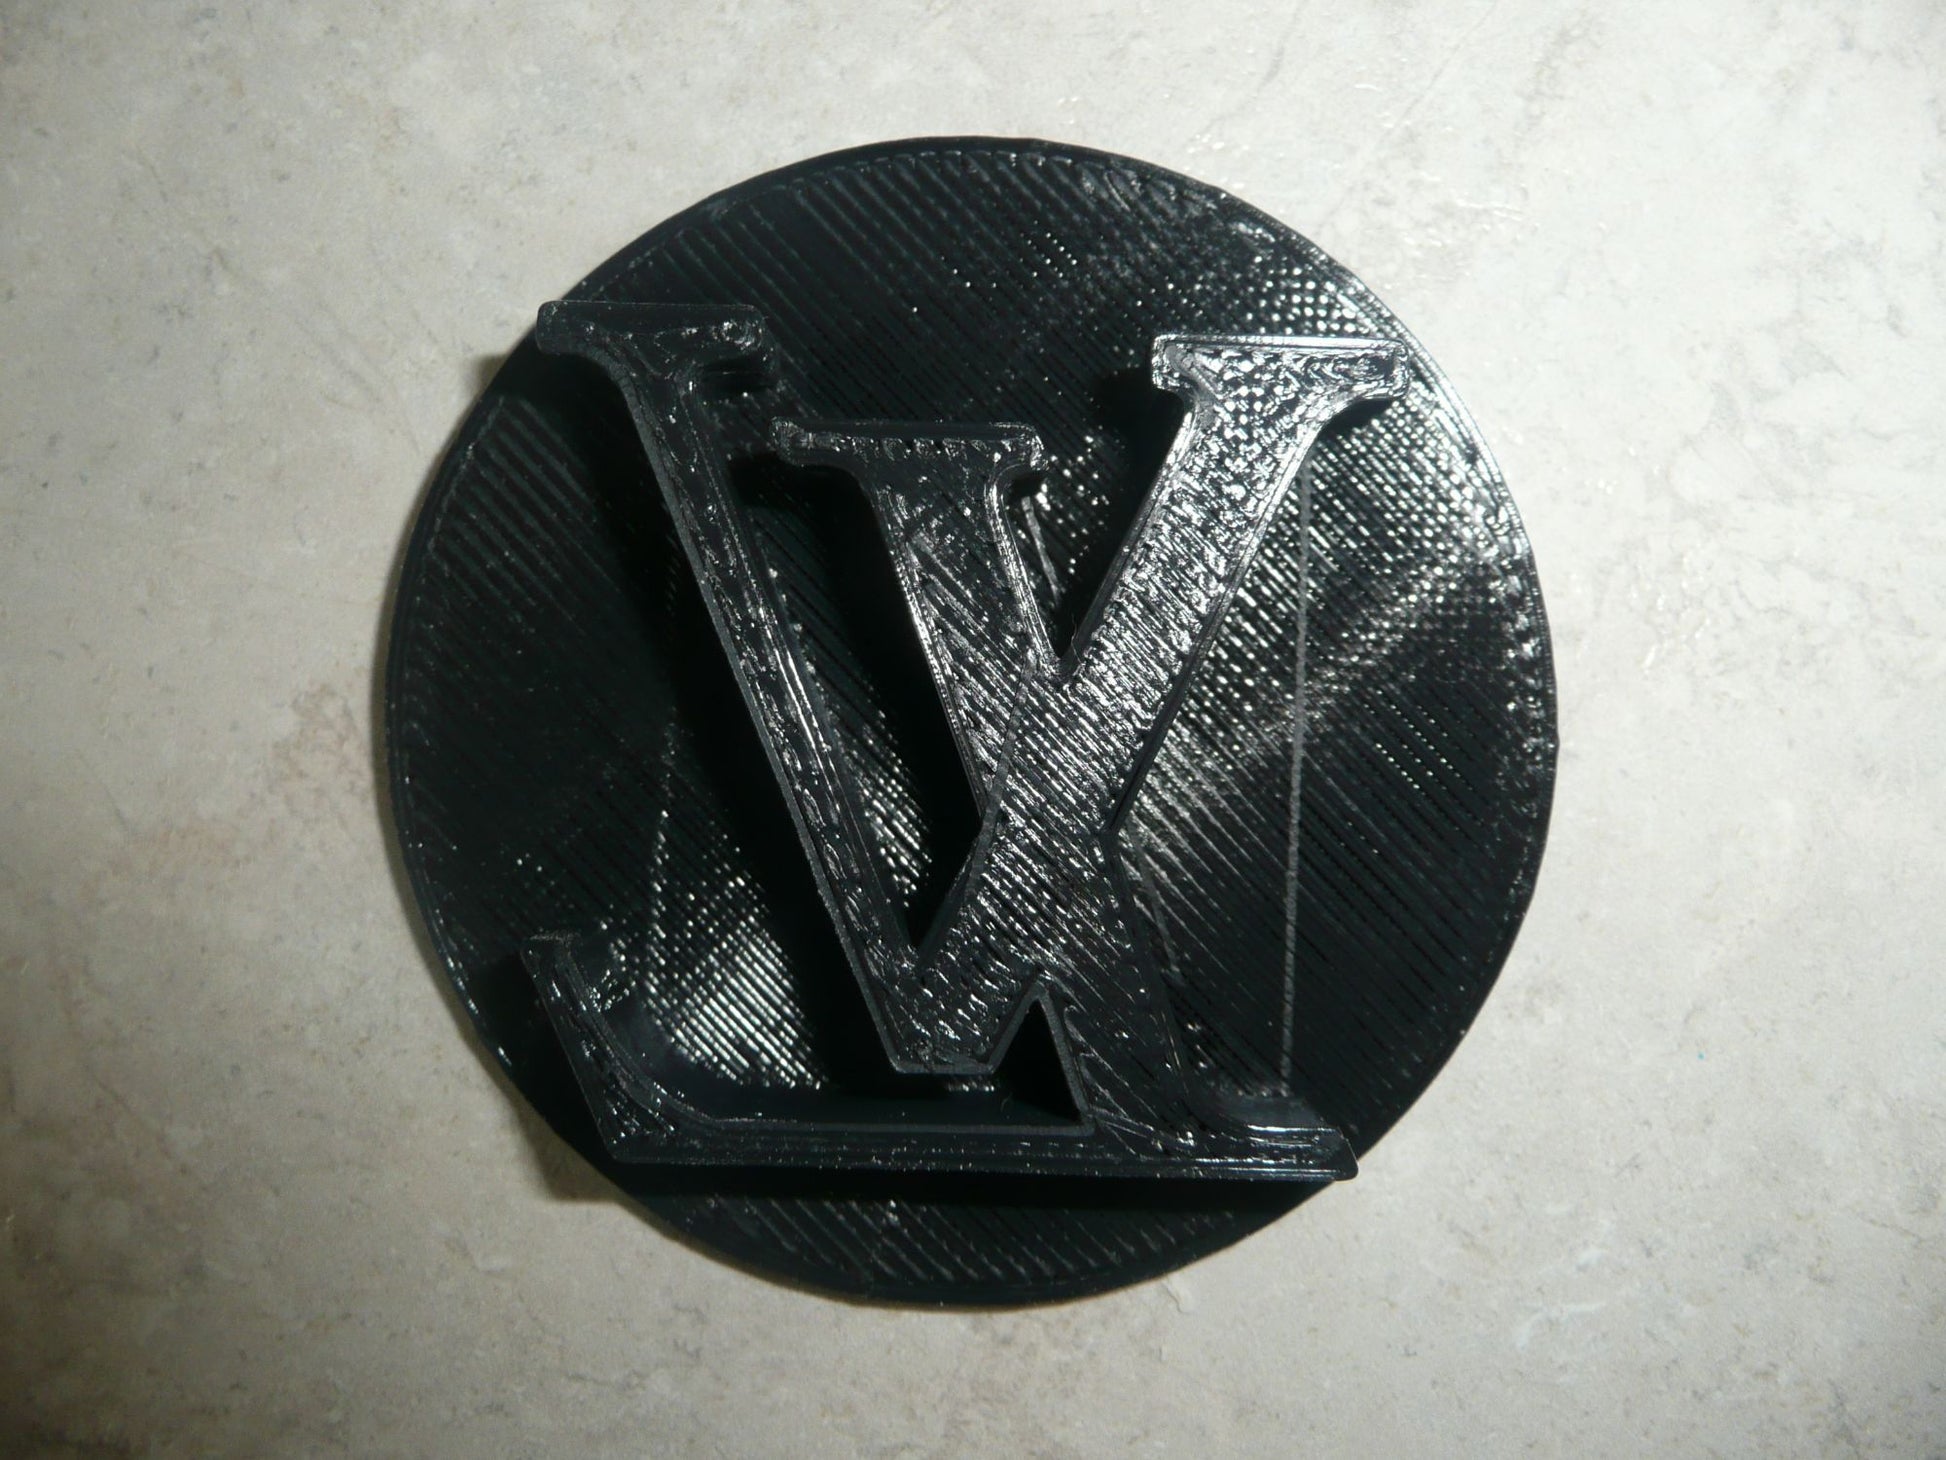 Cookie Cutters - Louis Vuitton logo plastic cookie cutter was sold